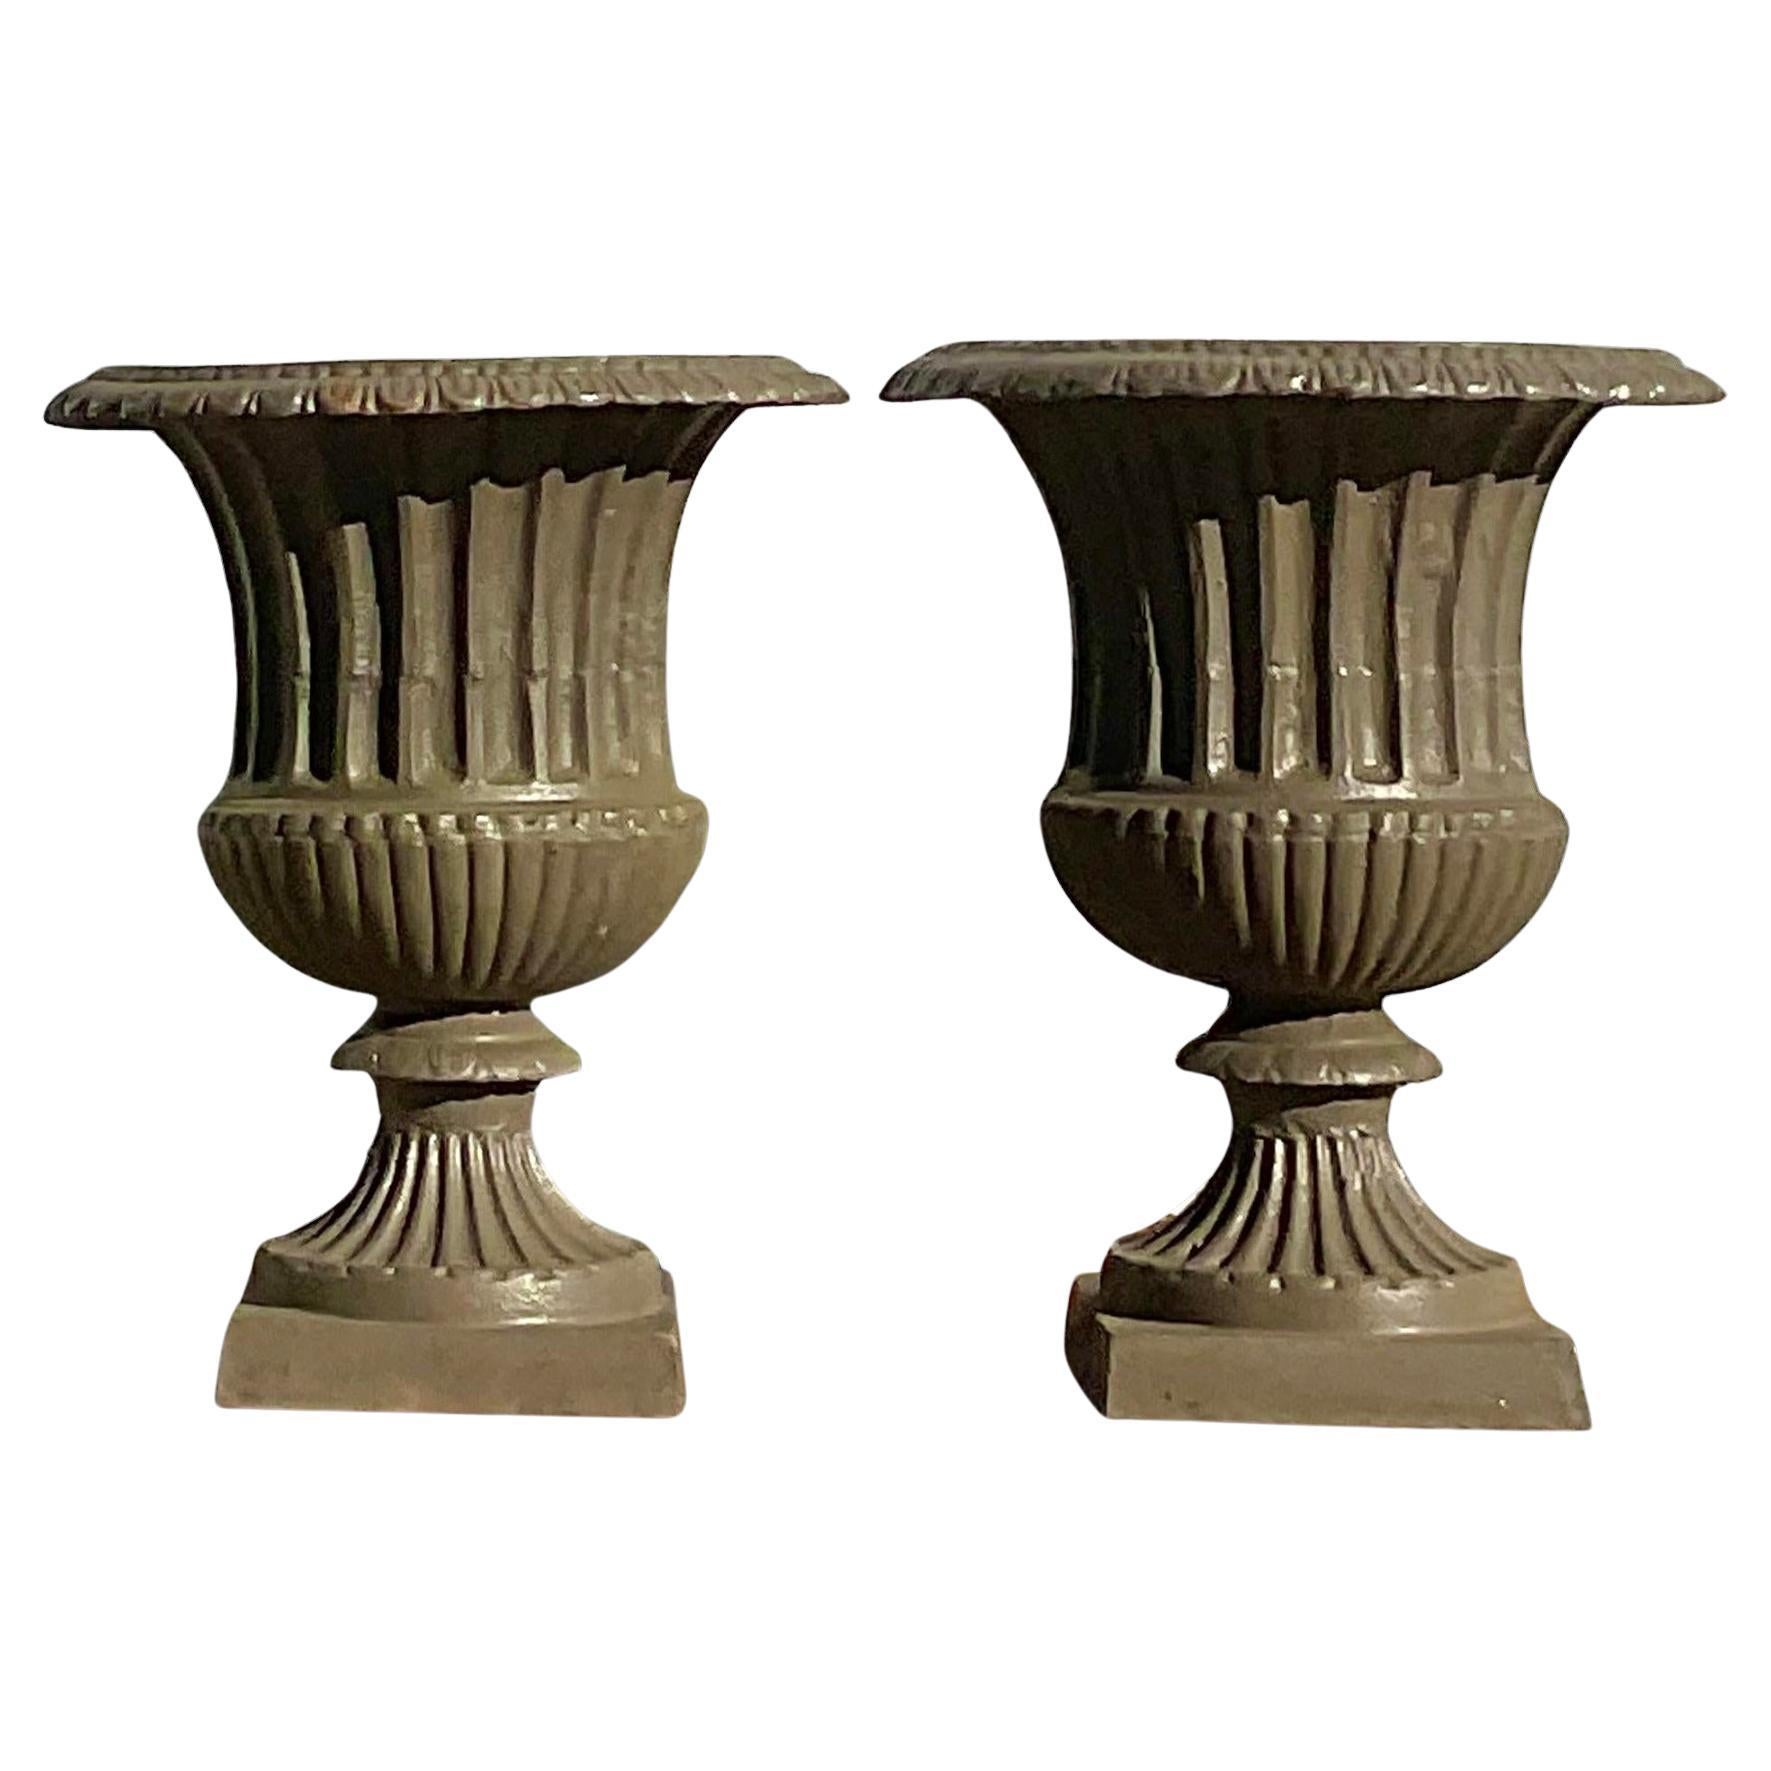 Vintage Mid 20th Century Boho Wrought Iron Urns - a Pair For Sale